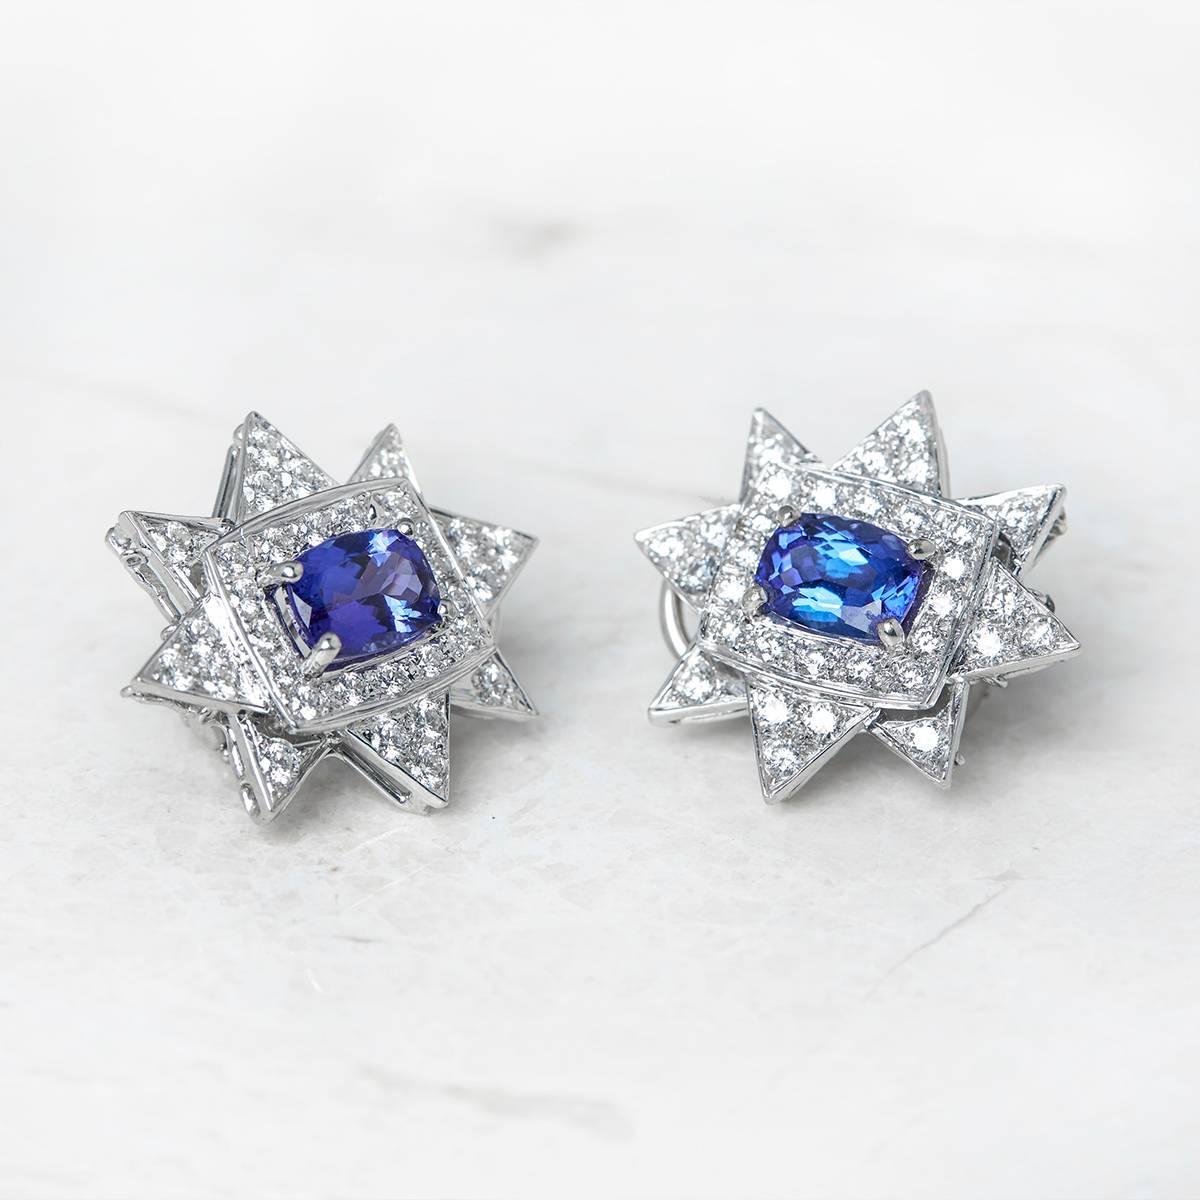 Code: J388
Description: 18k White Gold 3.00ct Tanzanite & 2.08ct Diamond Star Earrings
Accompanied With: Presentation Box
Gender: Ladies
Earring Length: 2.36cm
Earring Width: 2.16cm
Earring Back: Omega
Condition: 9
Material: White Gold
Total Weight: